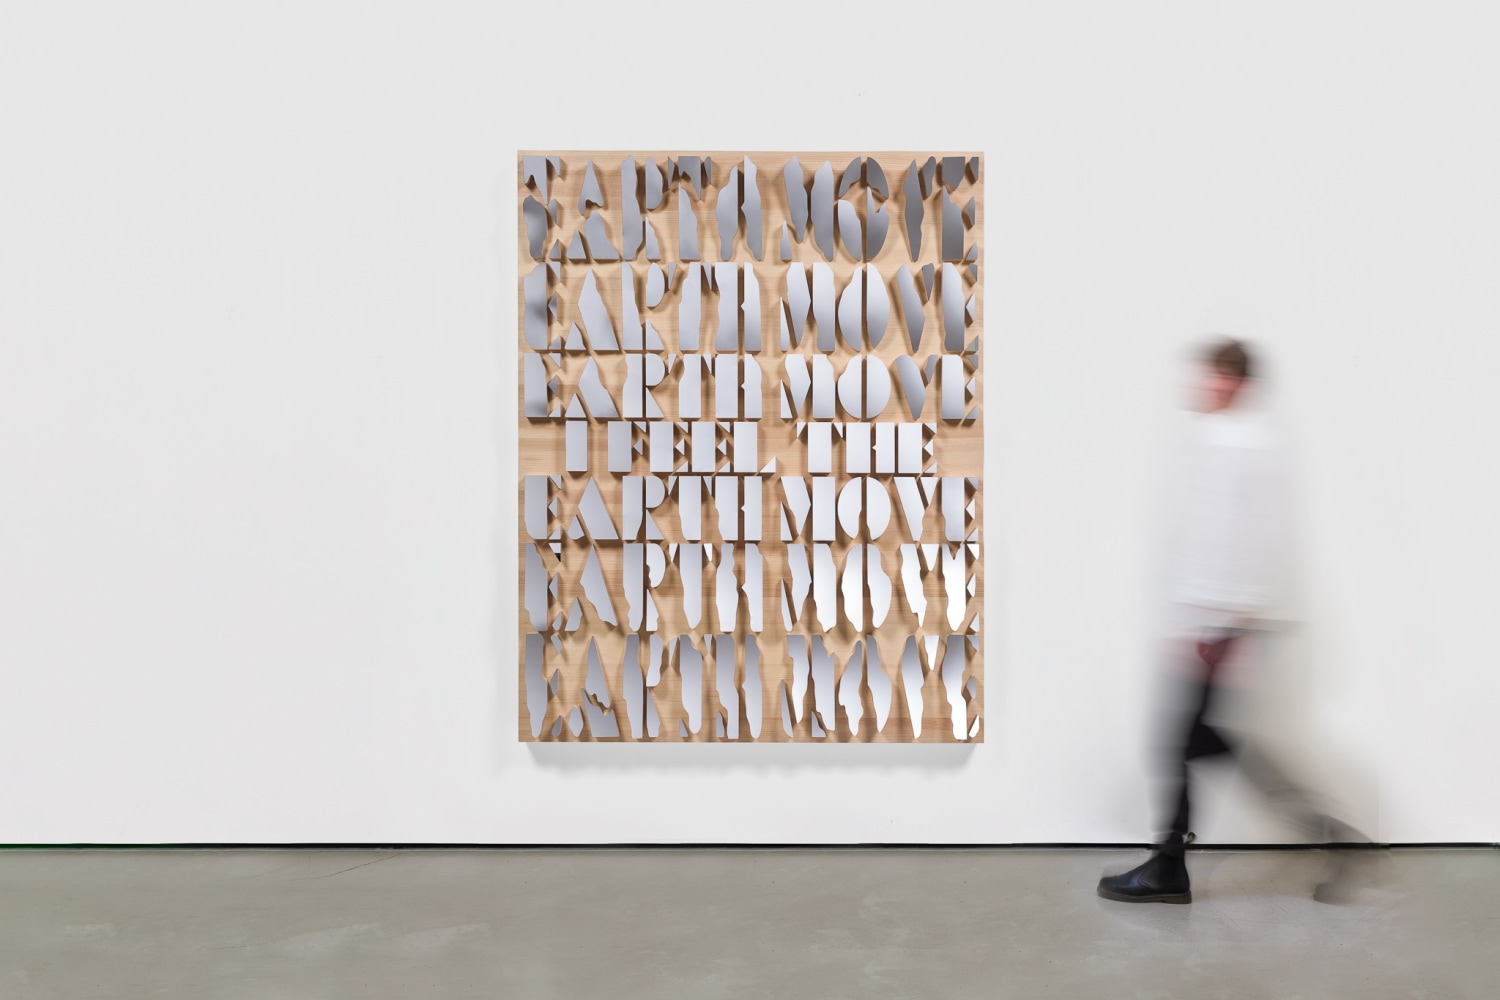 Doug Aitken

I Feel the Earth Move

2023

Wood, polished stainless steel

79 7/16 x 62 1/2 x 7 7/16 inches (201.8 x 158.8 x 18.9 cm)

Edition of 4

DA 817

$275,000